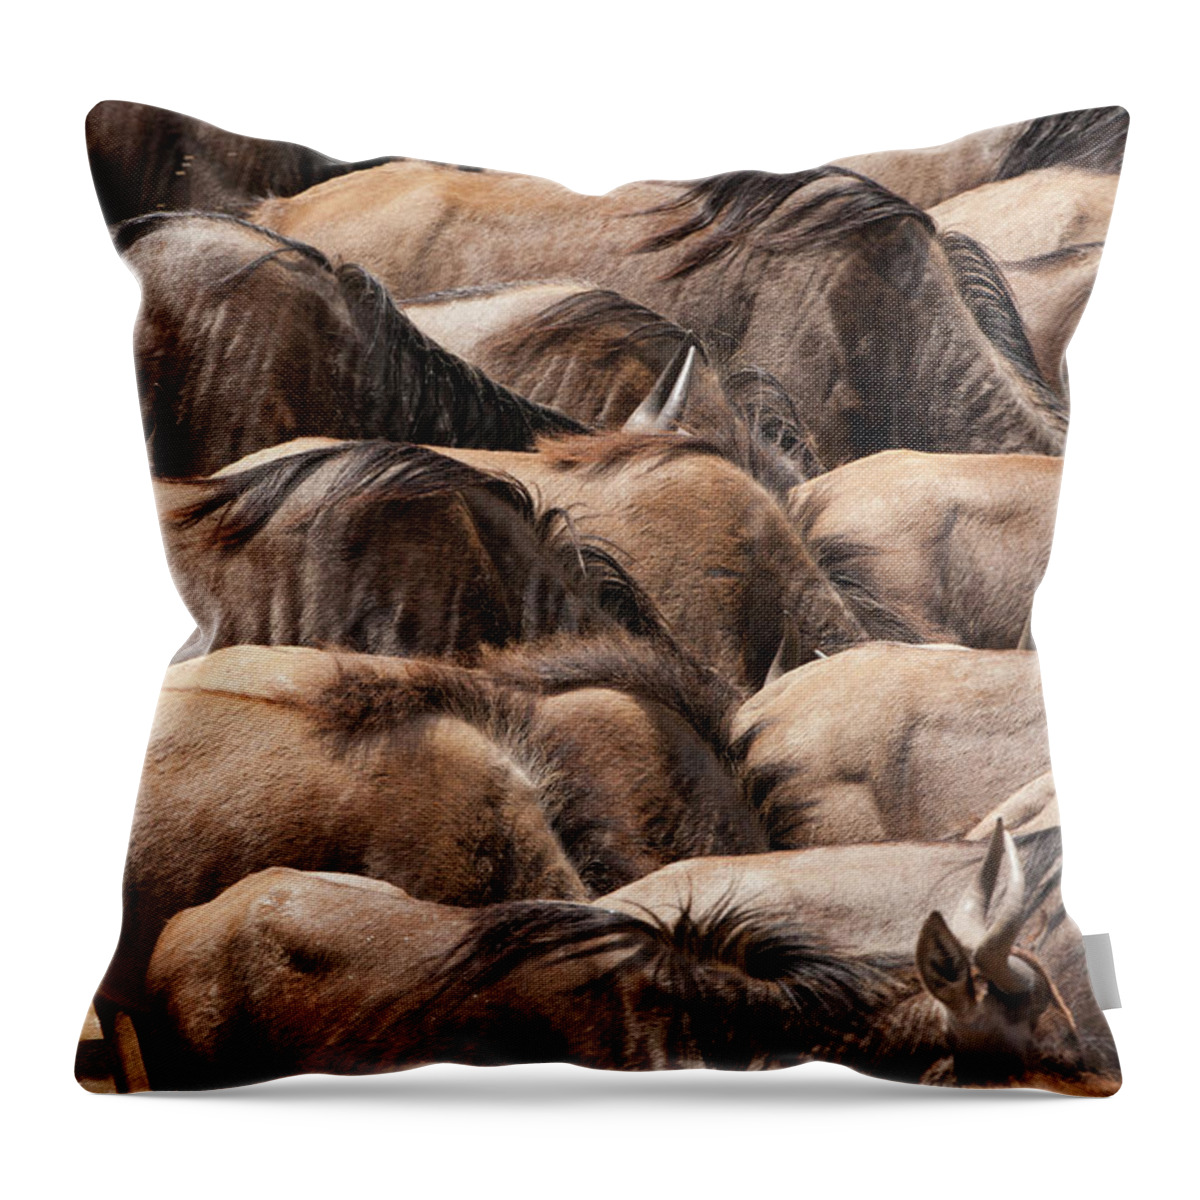 Kenya Throw Pillow featuring the photograph Wildebeests, Kenya by Mint Images/ Art Wolfe